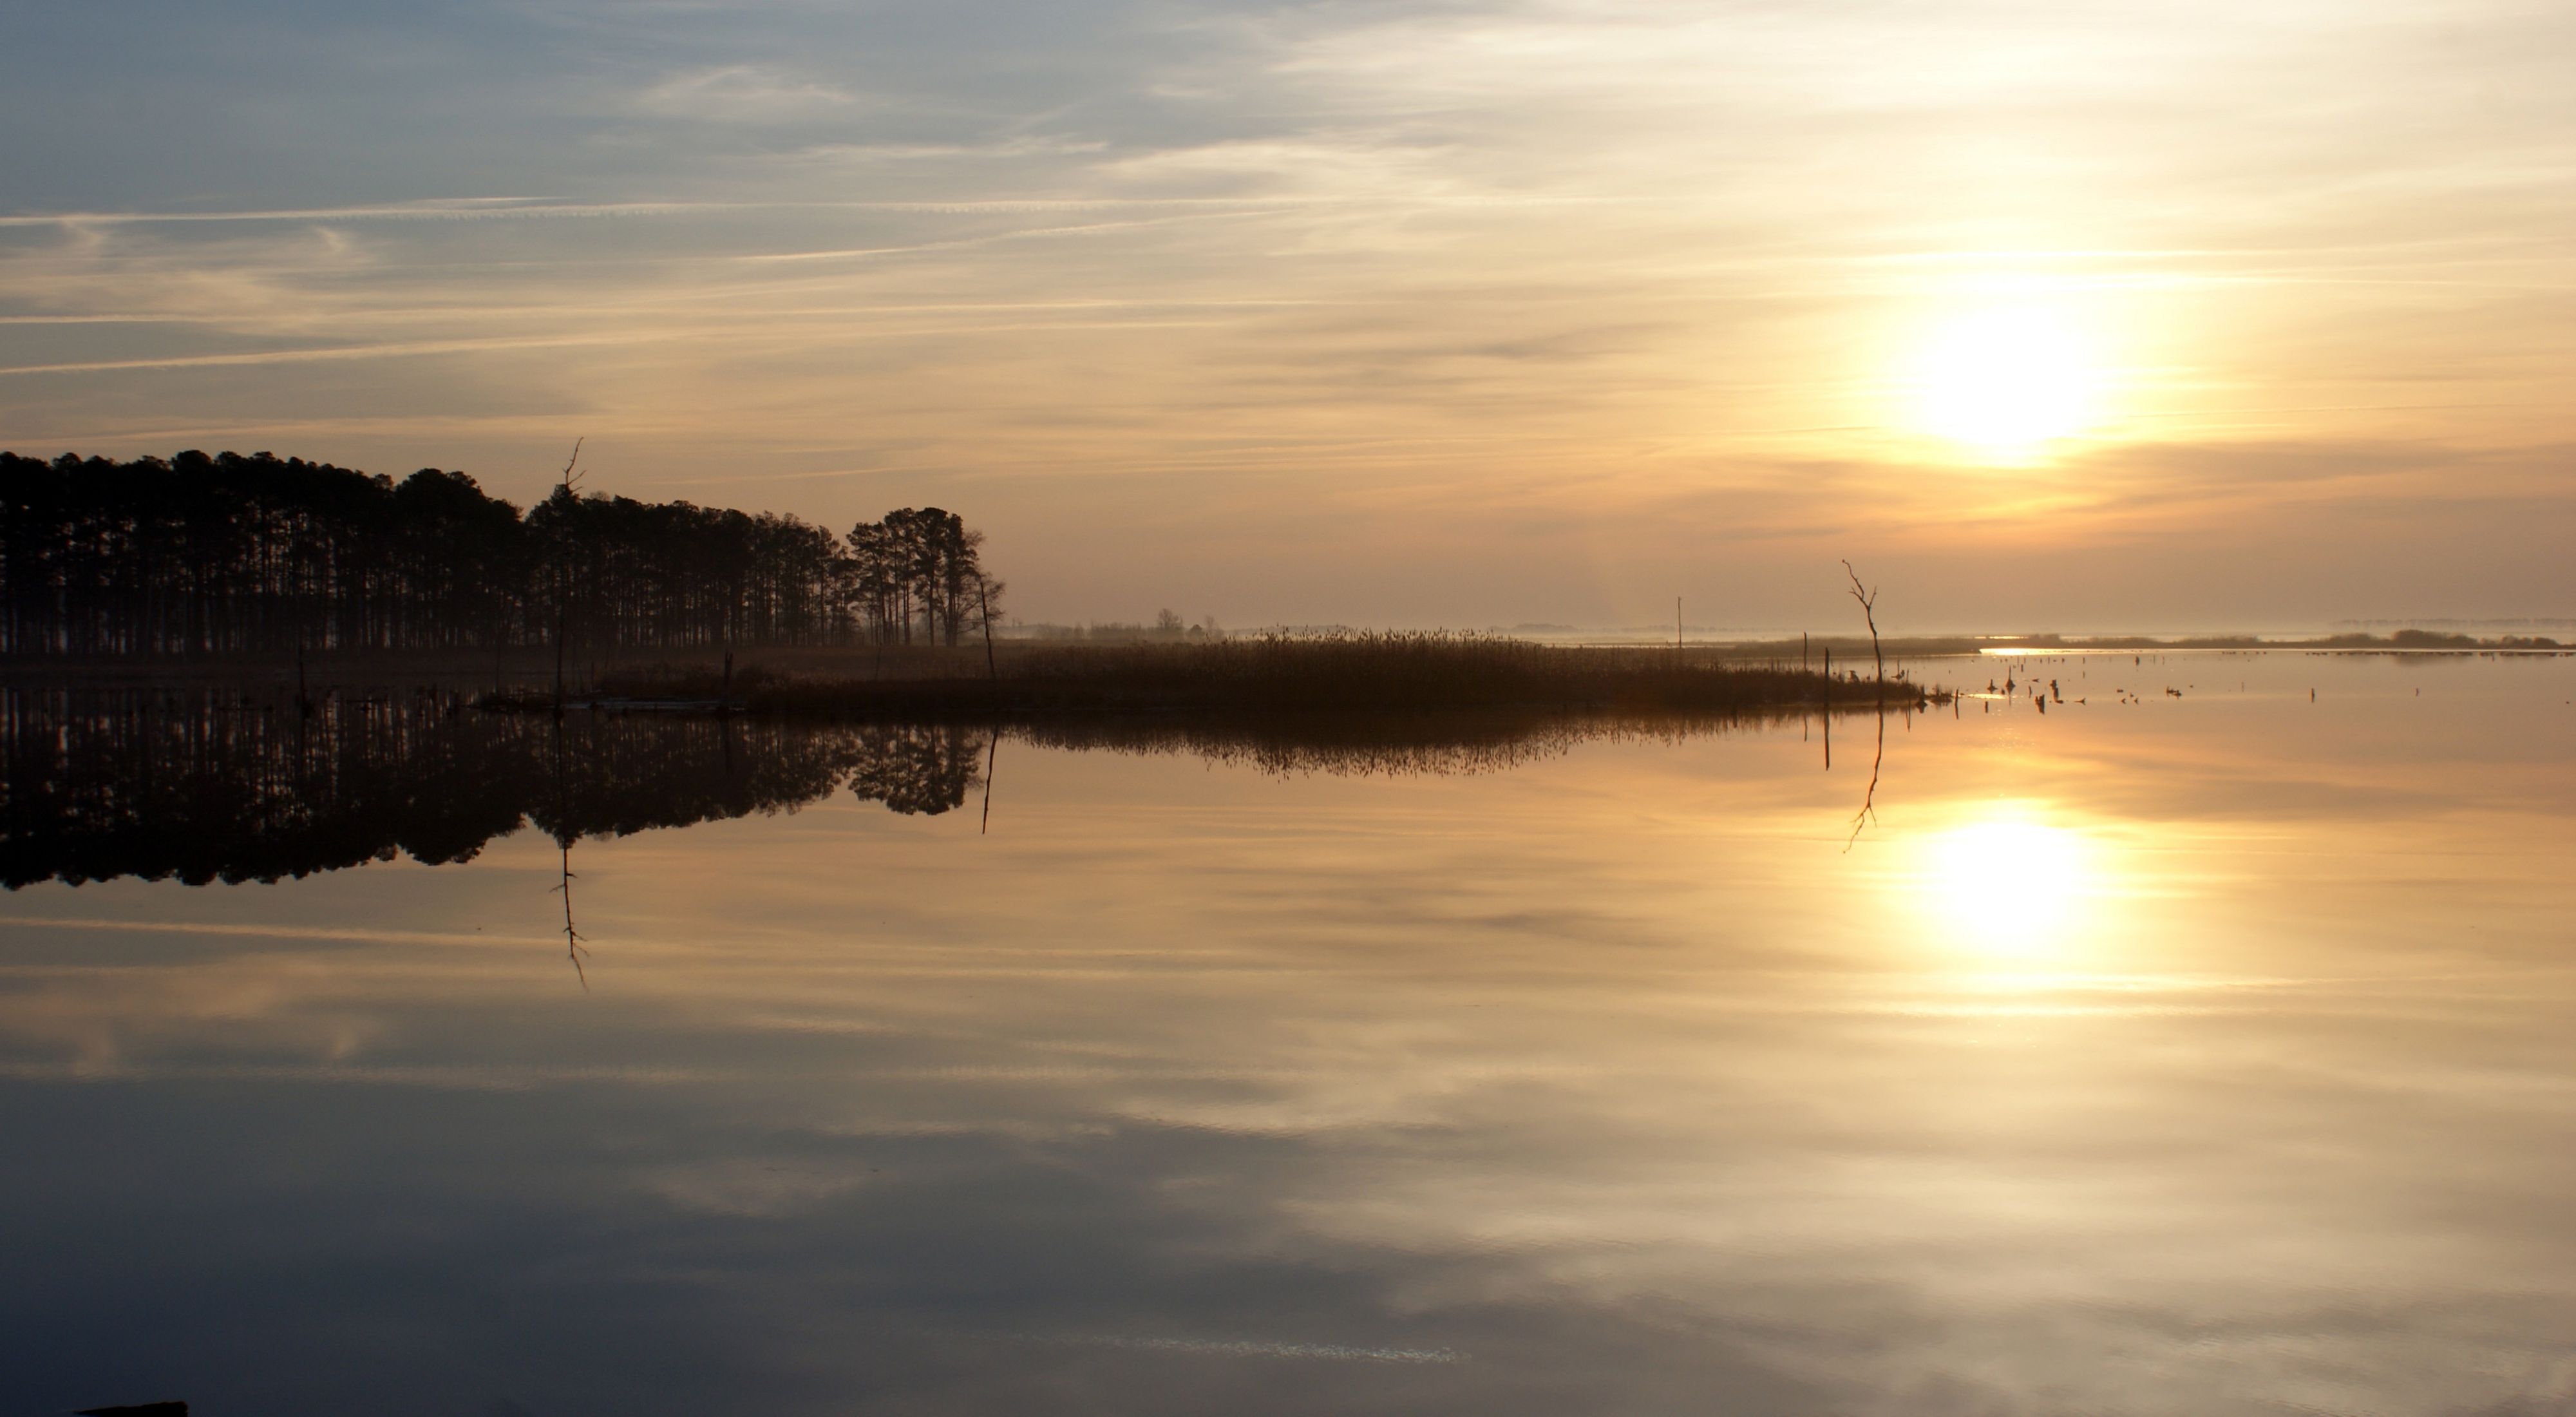 The sun rises over Blackwater National Wildlife Refuge. The sun is reflected in the still water.